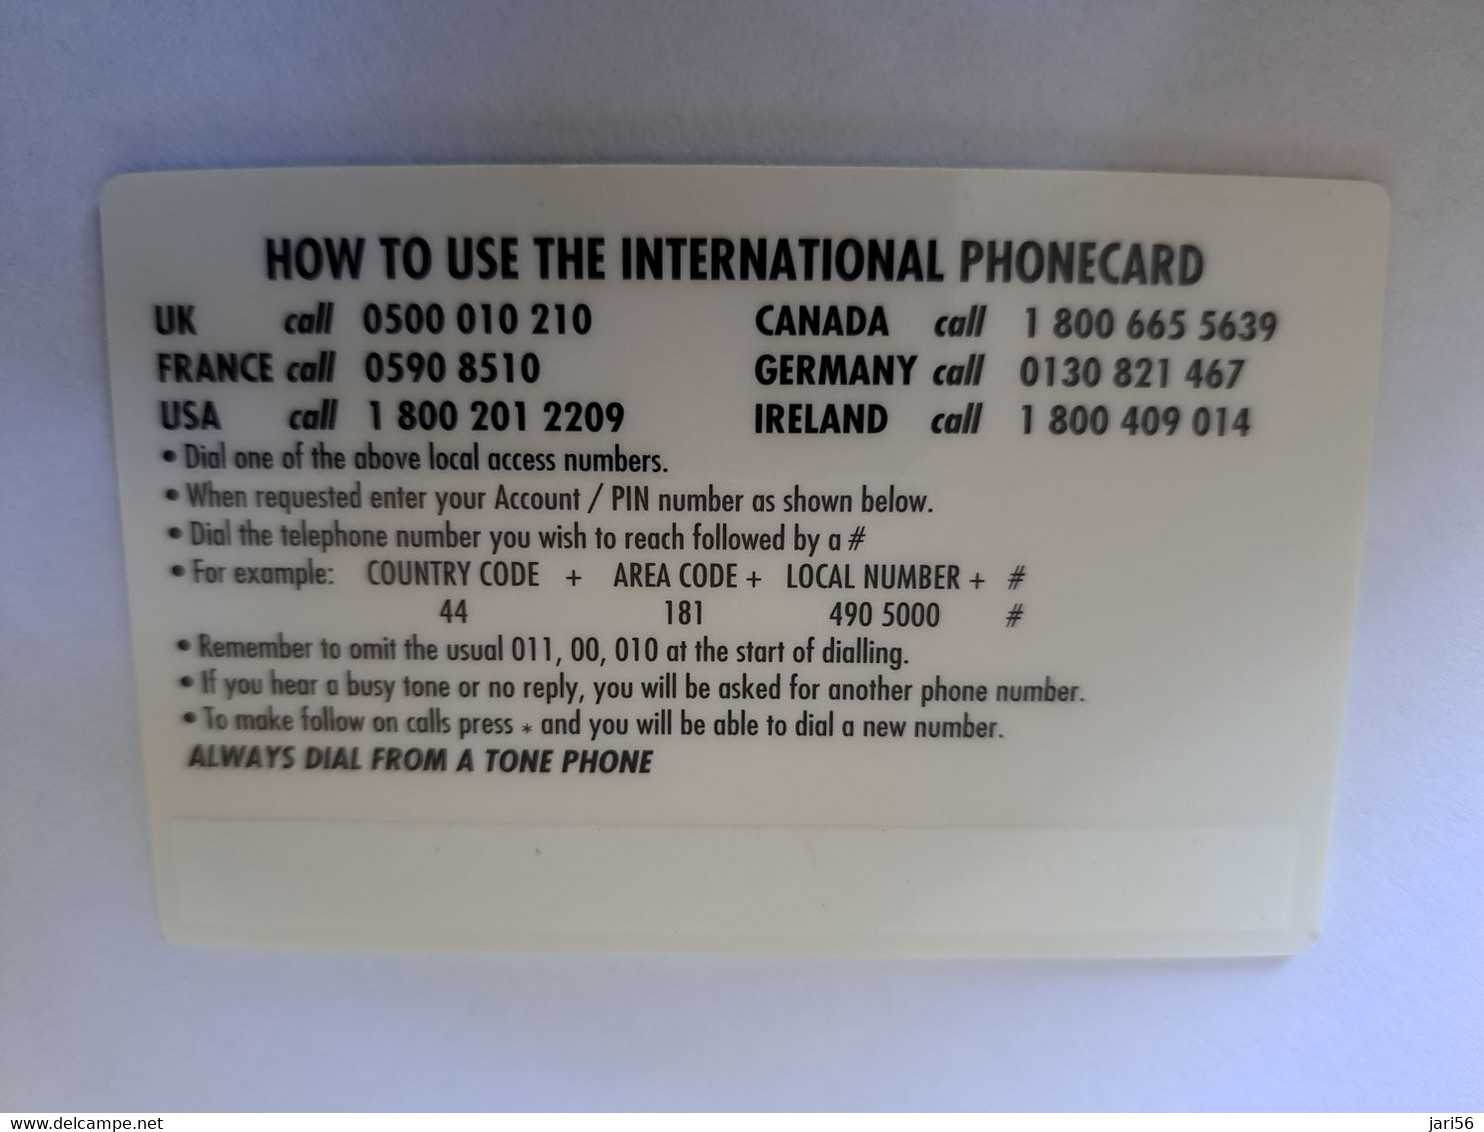 GREAT BRITAIN   10 POUND   / AEROPLANE  ANA      DIT PHONECARD    PREPAID CARD      **12131** - [10] Collections